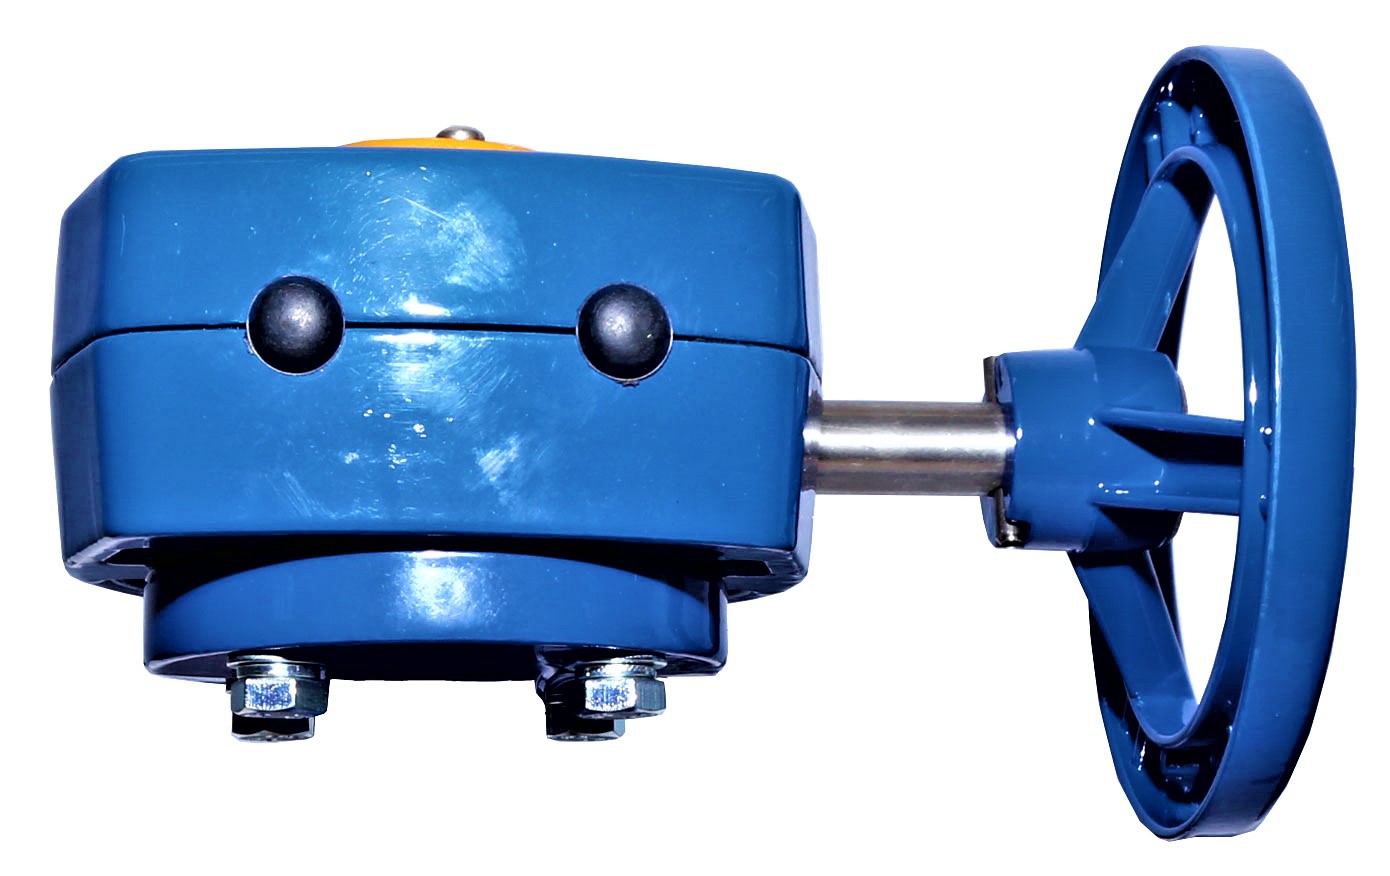 Gear Box For Butterfly Valves